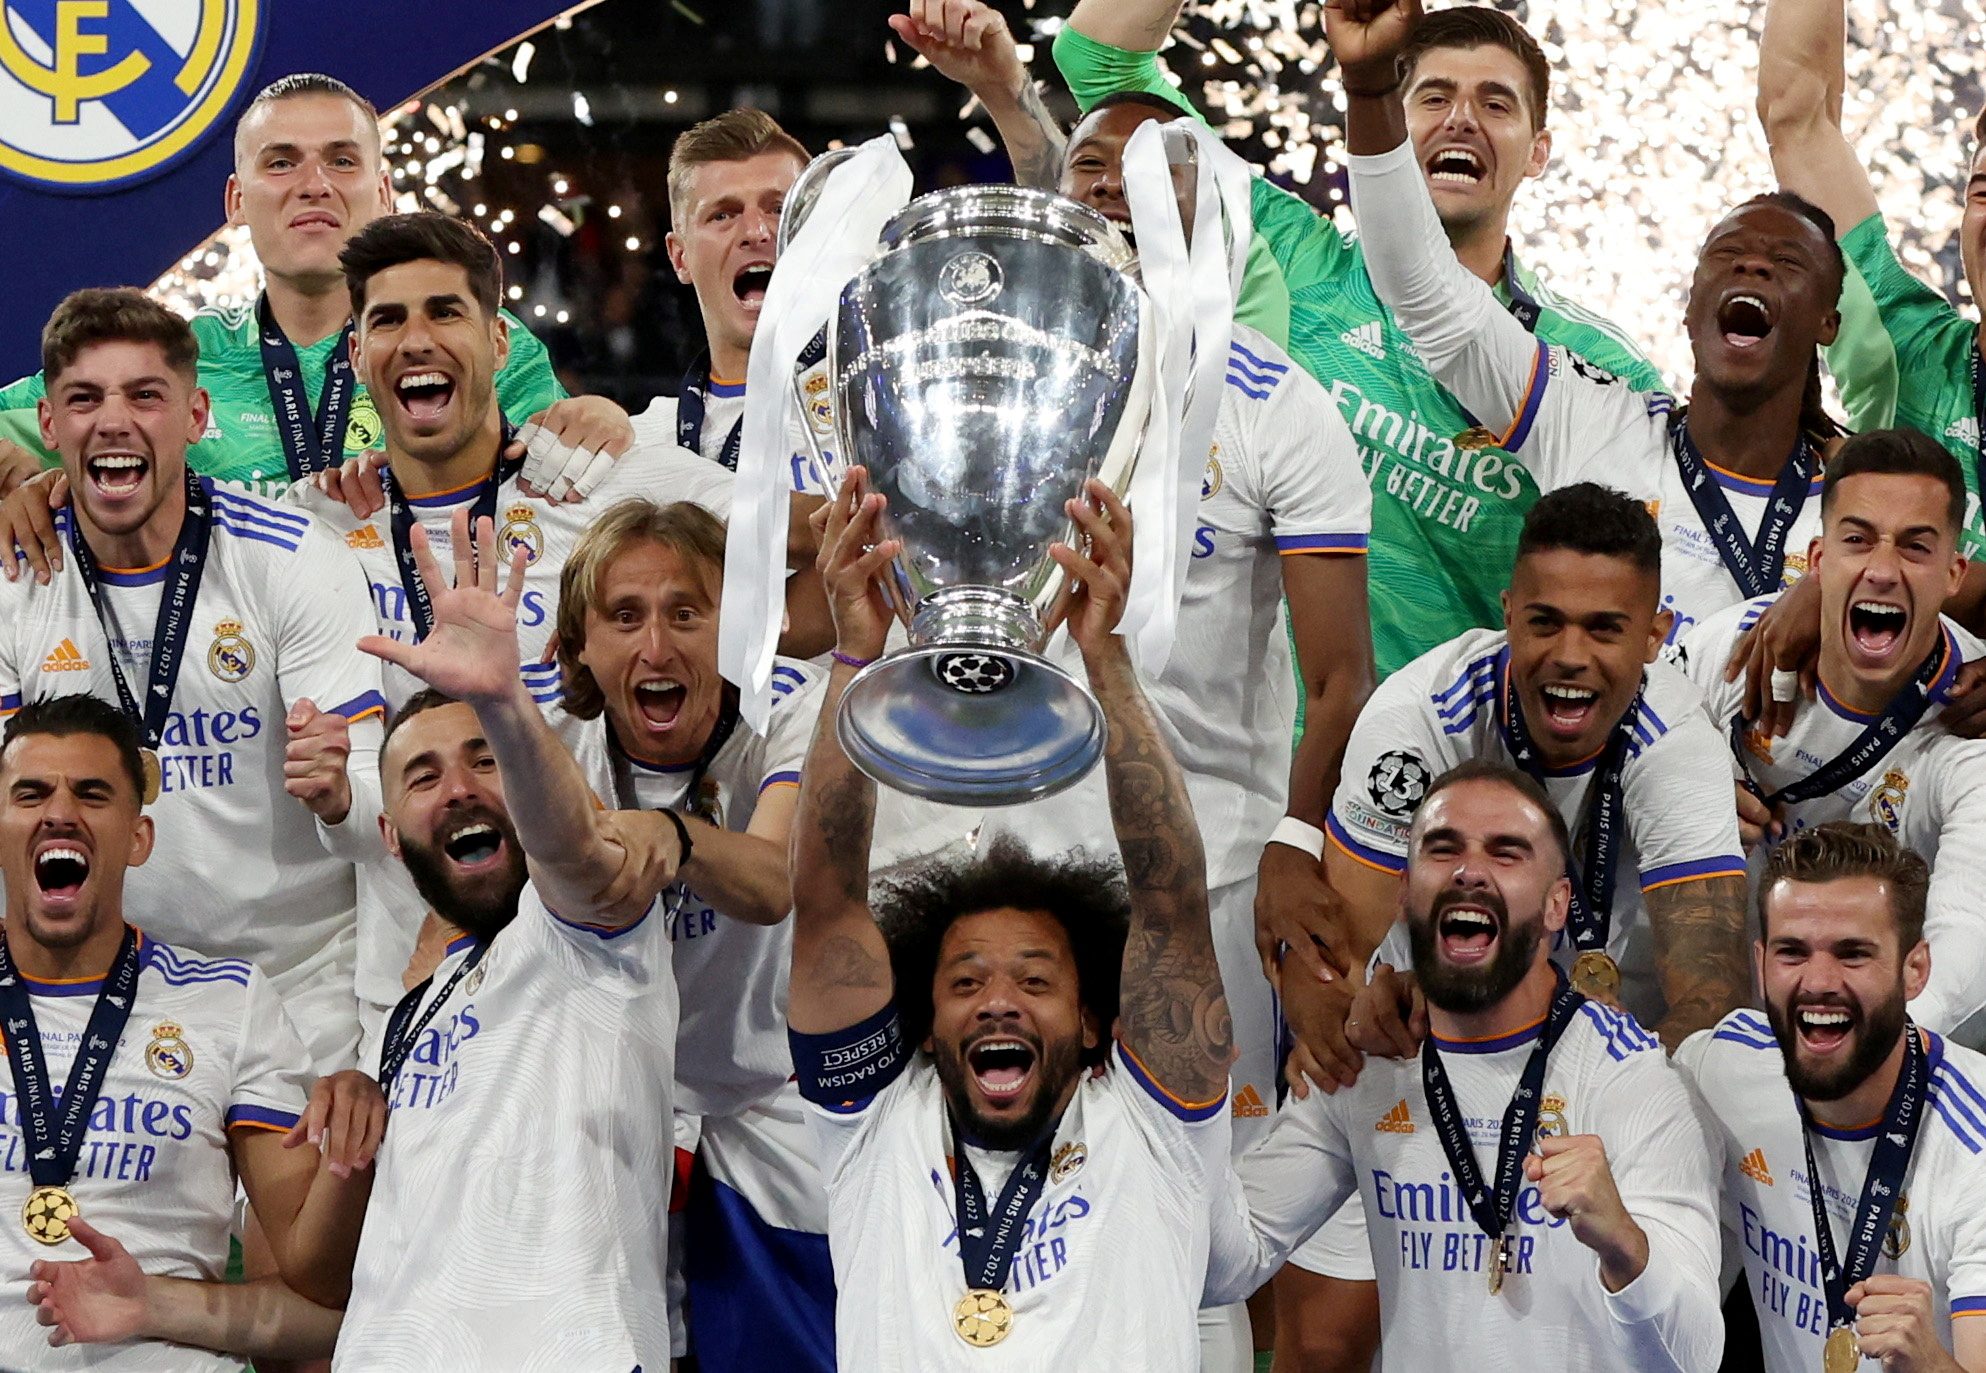 Clinical Real Madrid down Liverpool to claim 14th European Cup